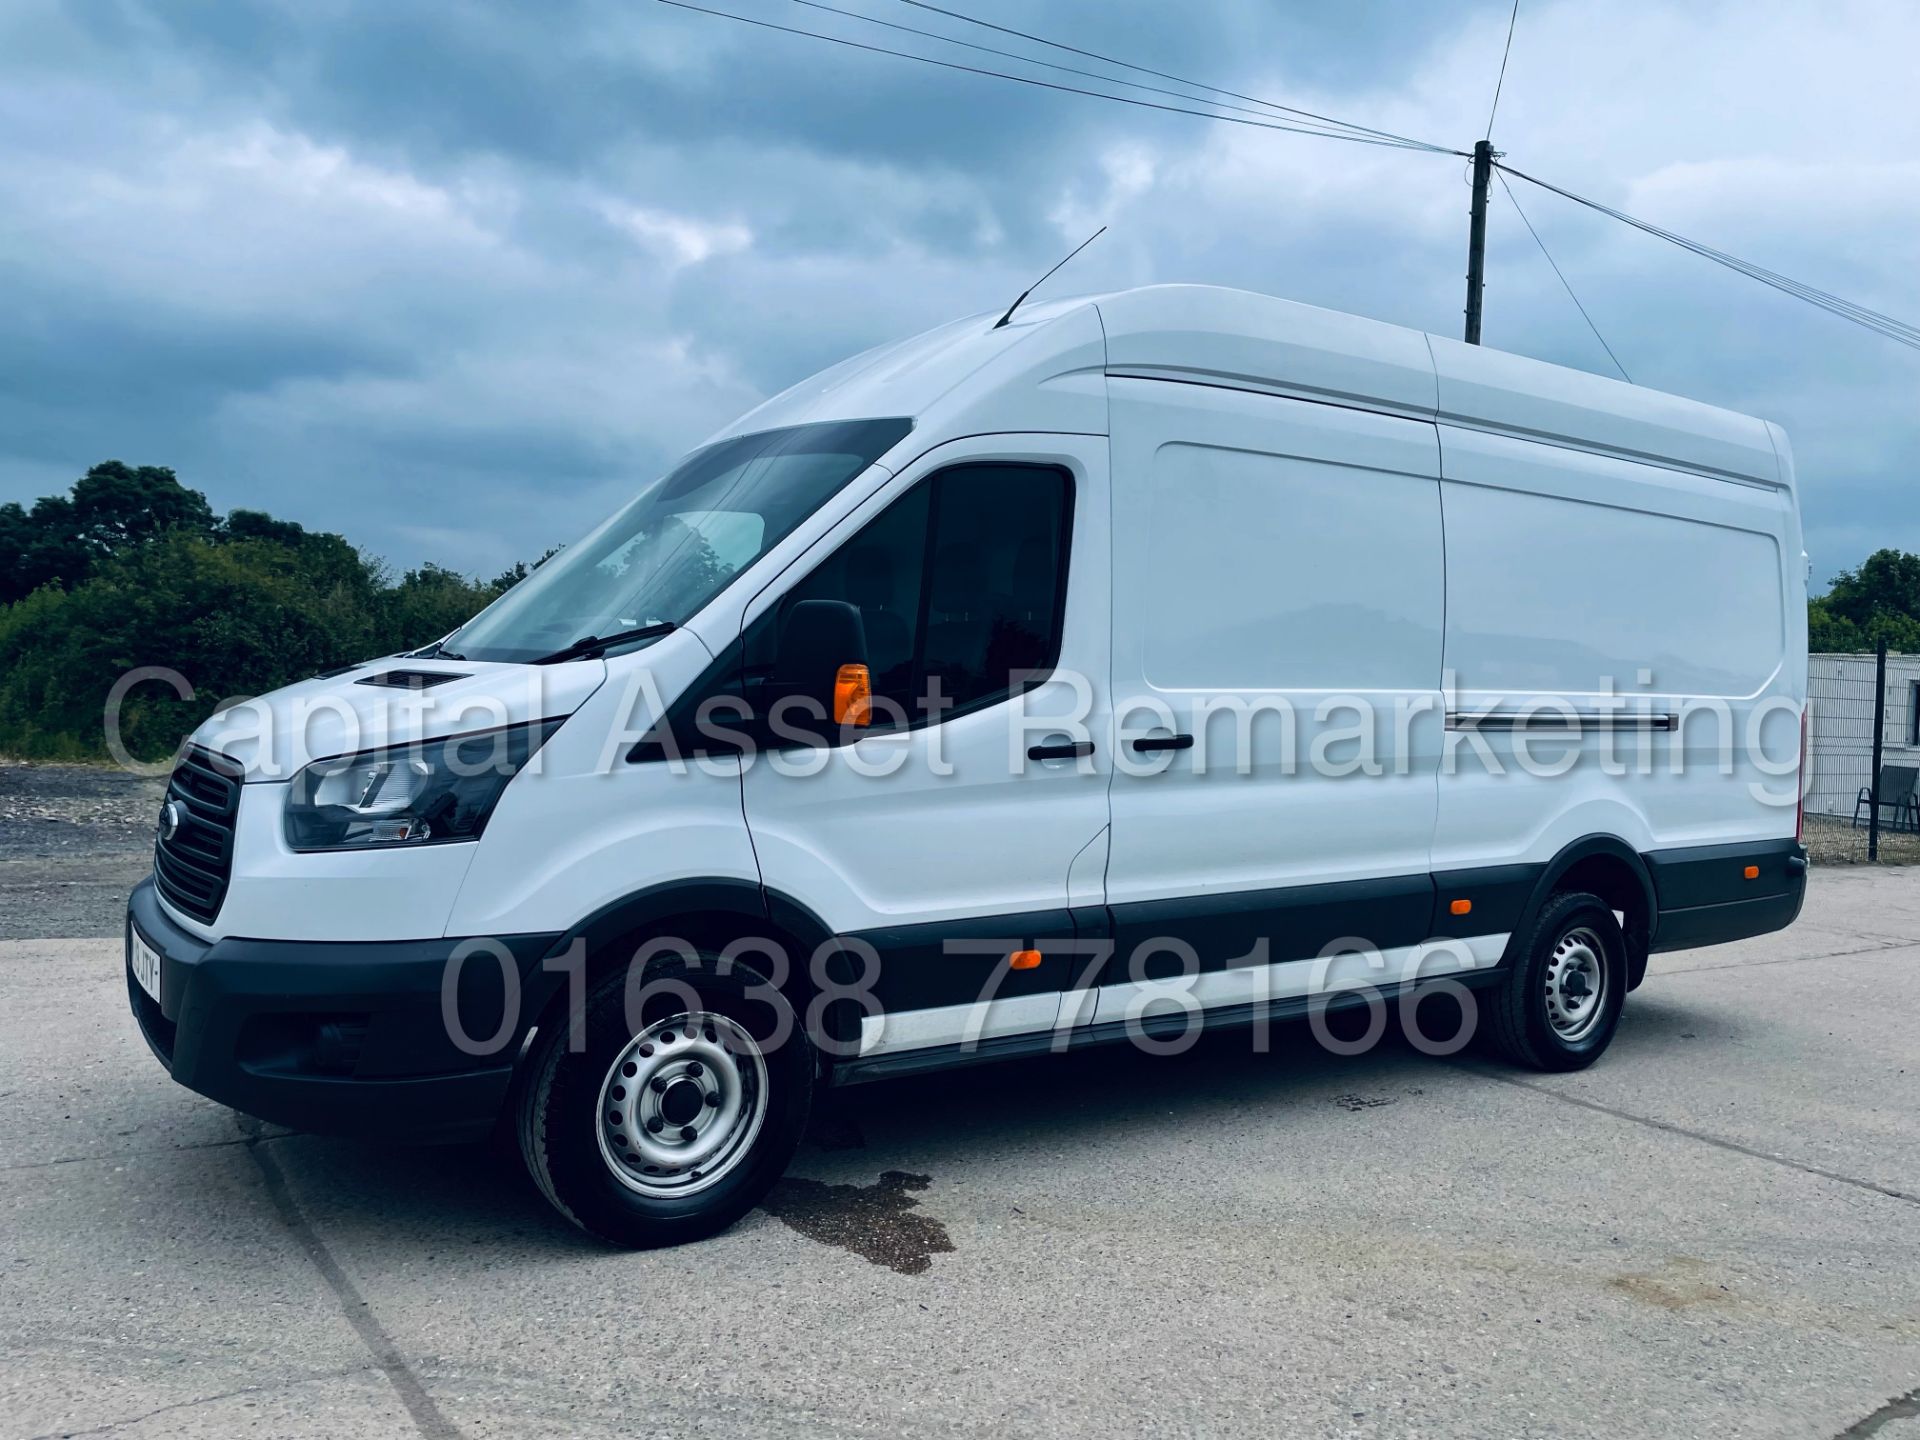 FORD TRANSIT 130 T350 *L4 - XLWB HI-ROOF* (2019 - EURO 6) '2.0 TDCI - 6 SPEED' (1 OWNER) *AIR CON* - Image 7 of 42